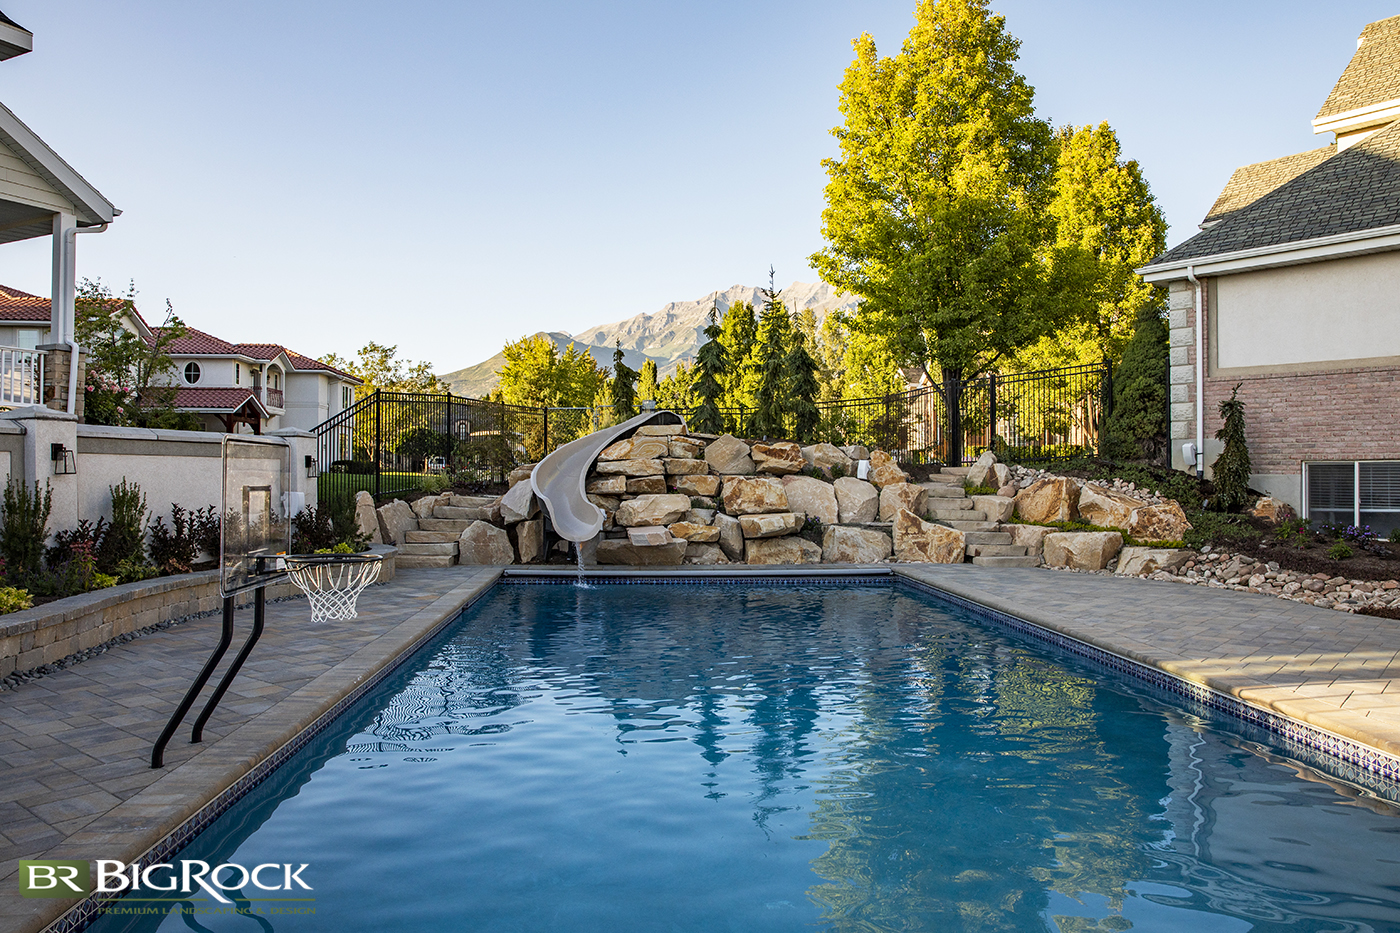 Step up your pool design and installation with a pool slide surrounded by natural rock for the ultimate backyard pool design.